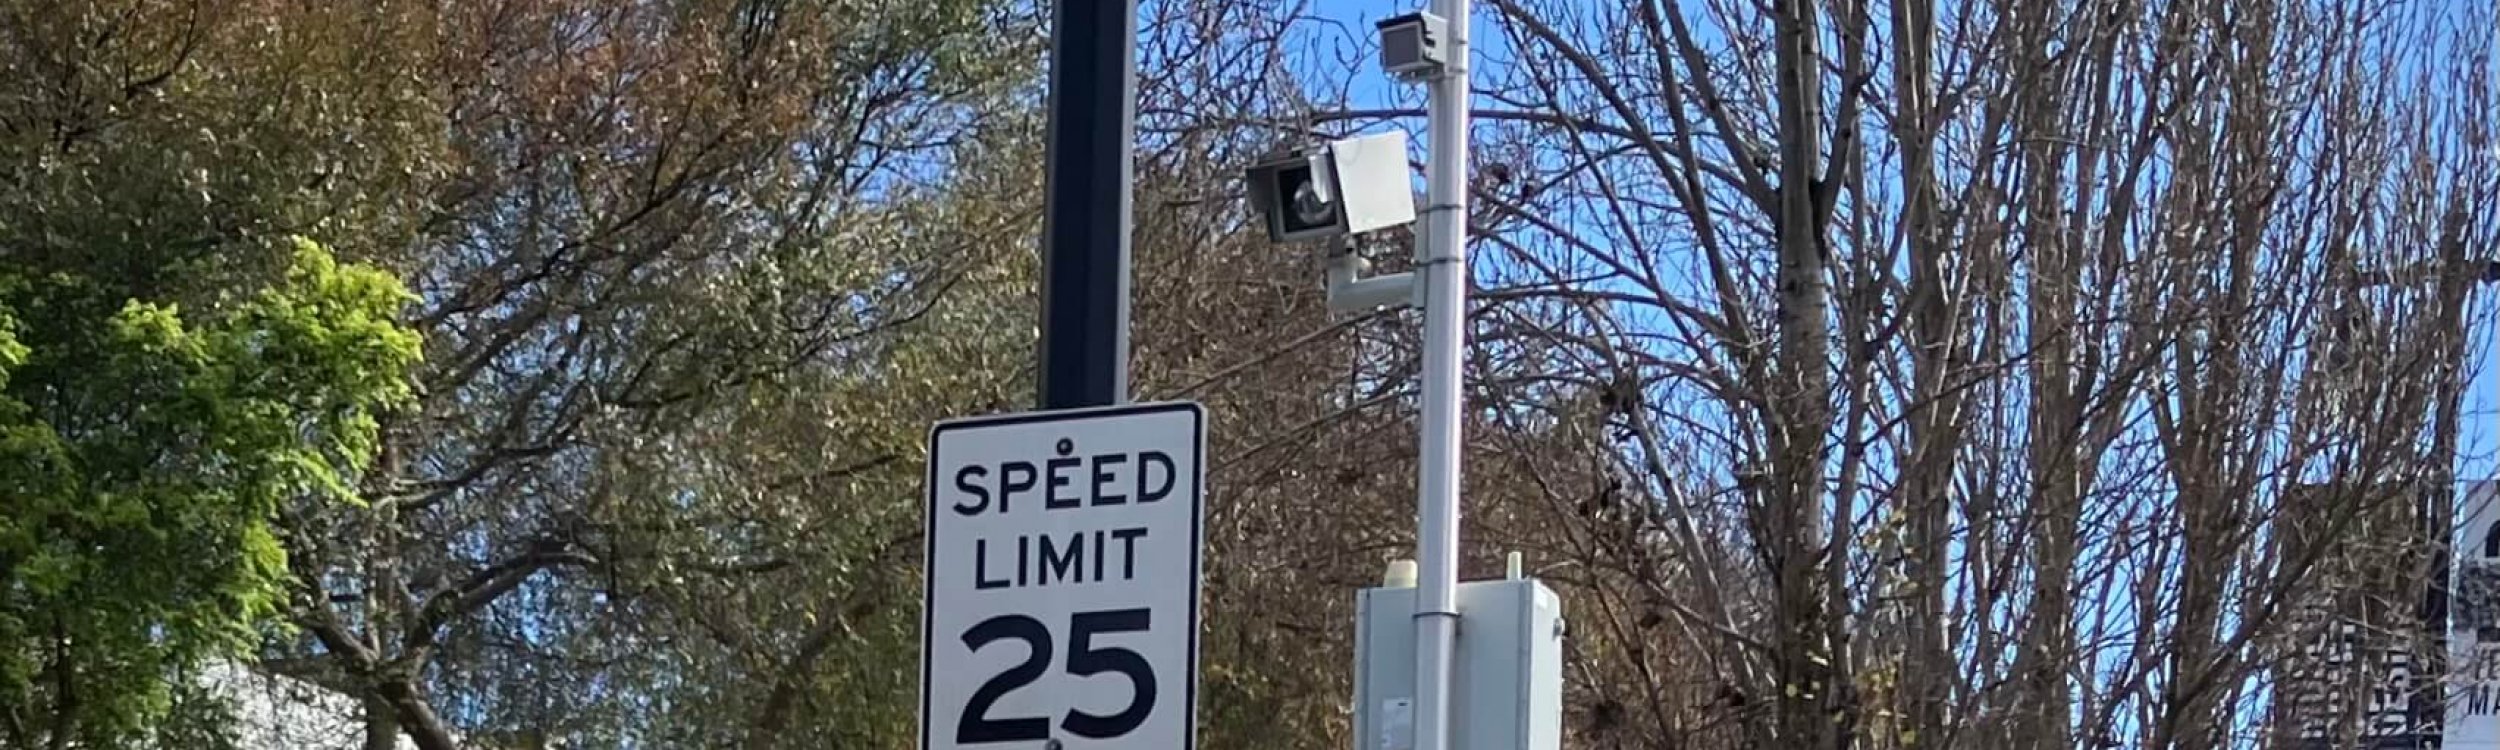 Speed cameras one step closer to being on our streets, and not a moment too soon